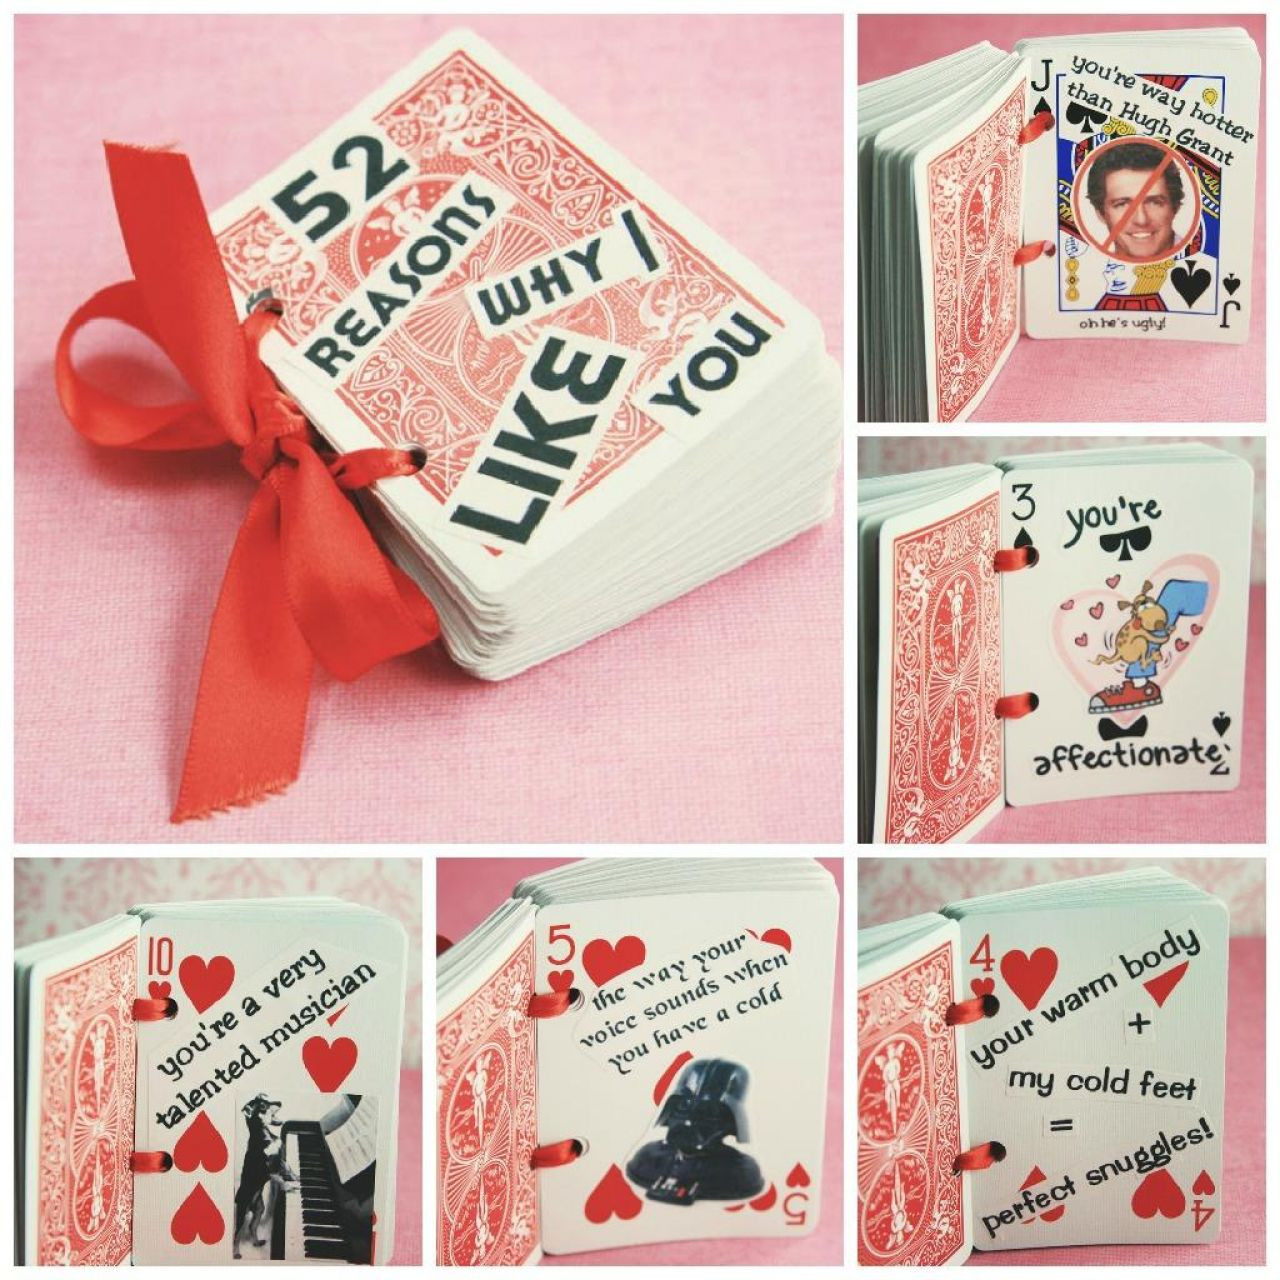 Cute Ideas For Valentines Day For Him
 24 LOVELY VALENTINE S DAY GIFTS FOR YOUR BOYFRIEND